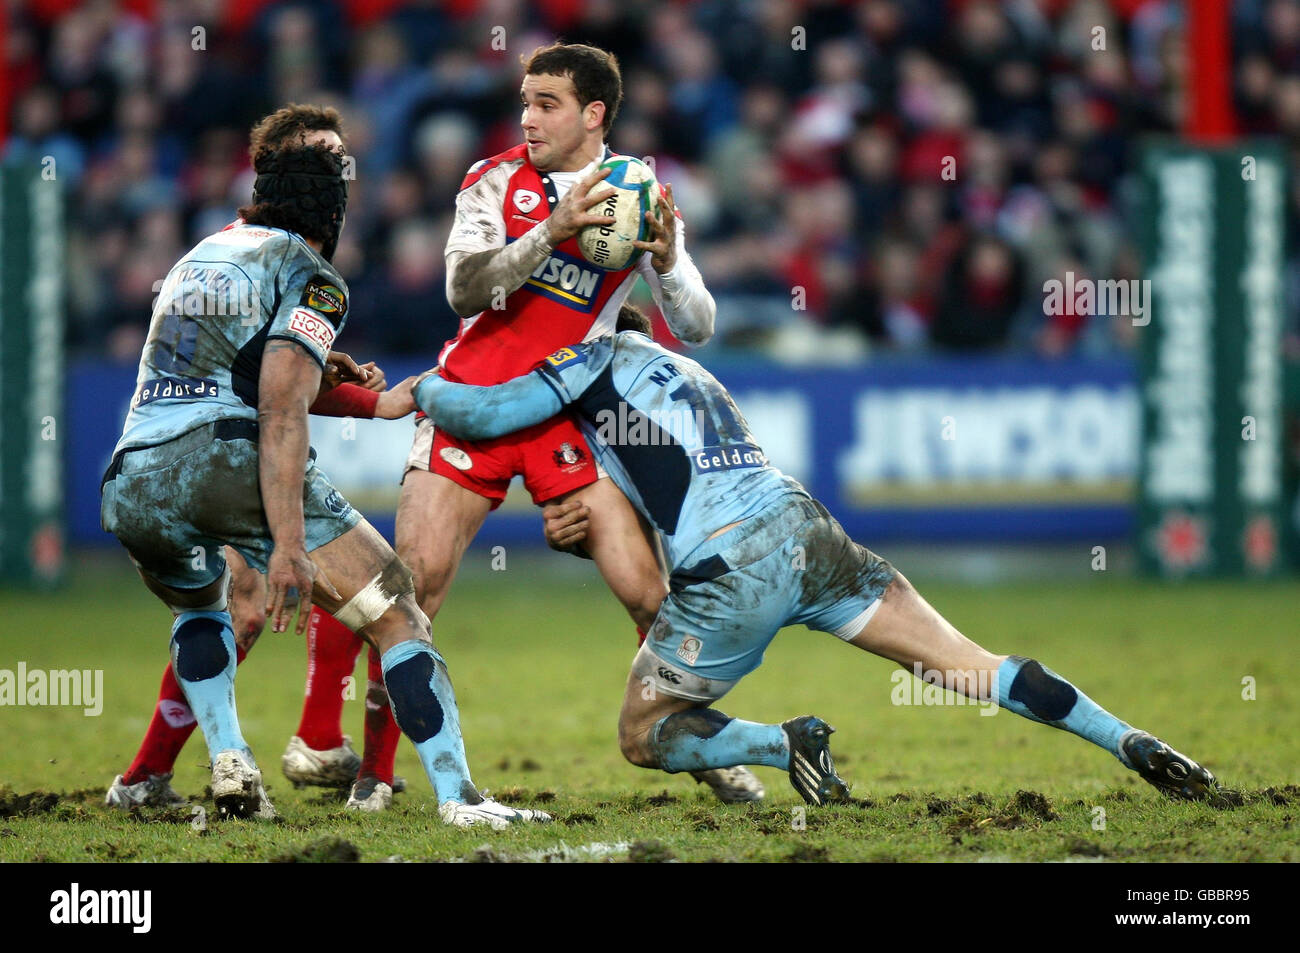 Gloucester's Olly Barkley is tackled by Cardiff's Nicky Robinson during the Heineken Cup match at Kingsholm Stadium, Gloucester. Stock Photo